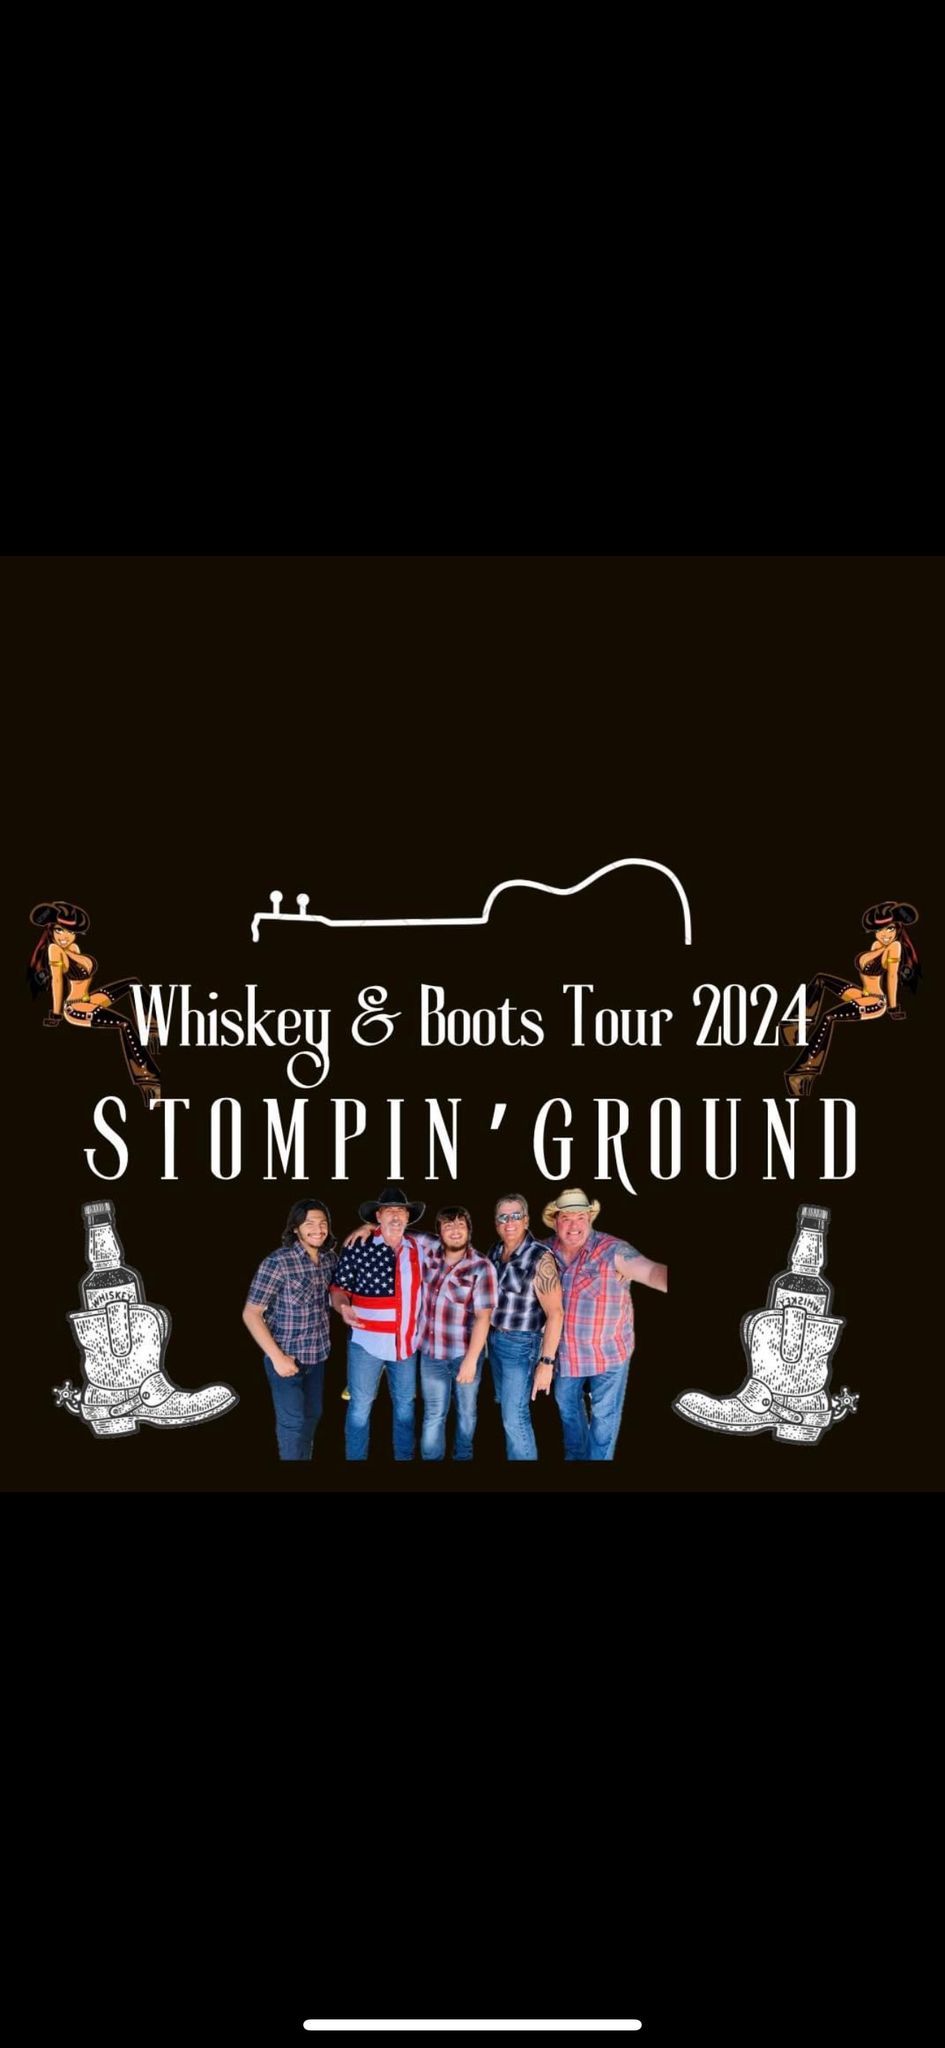 Stompin' Ground Live at Tumbleweeds West!